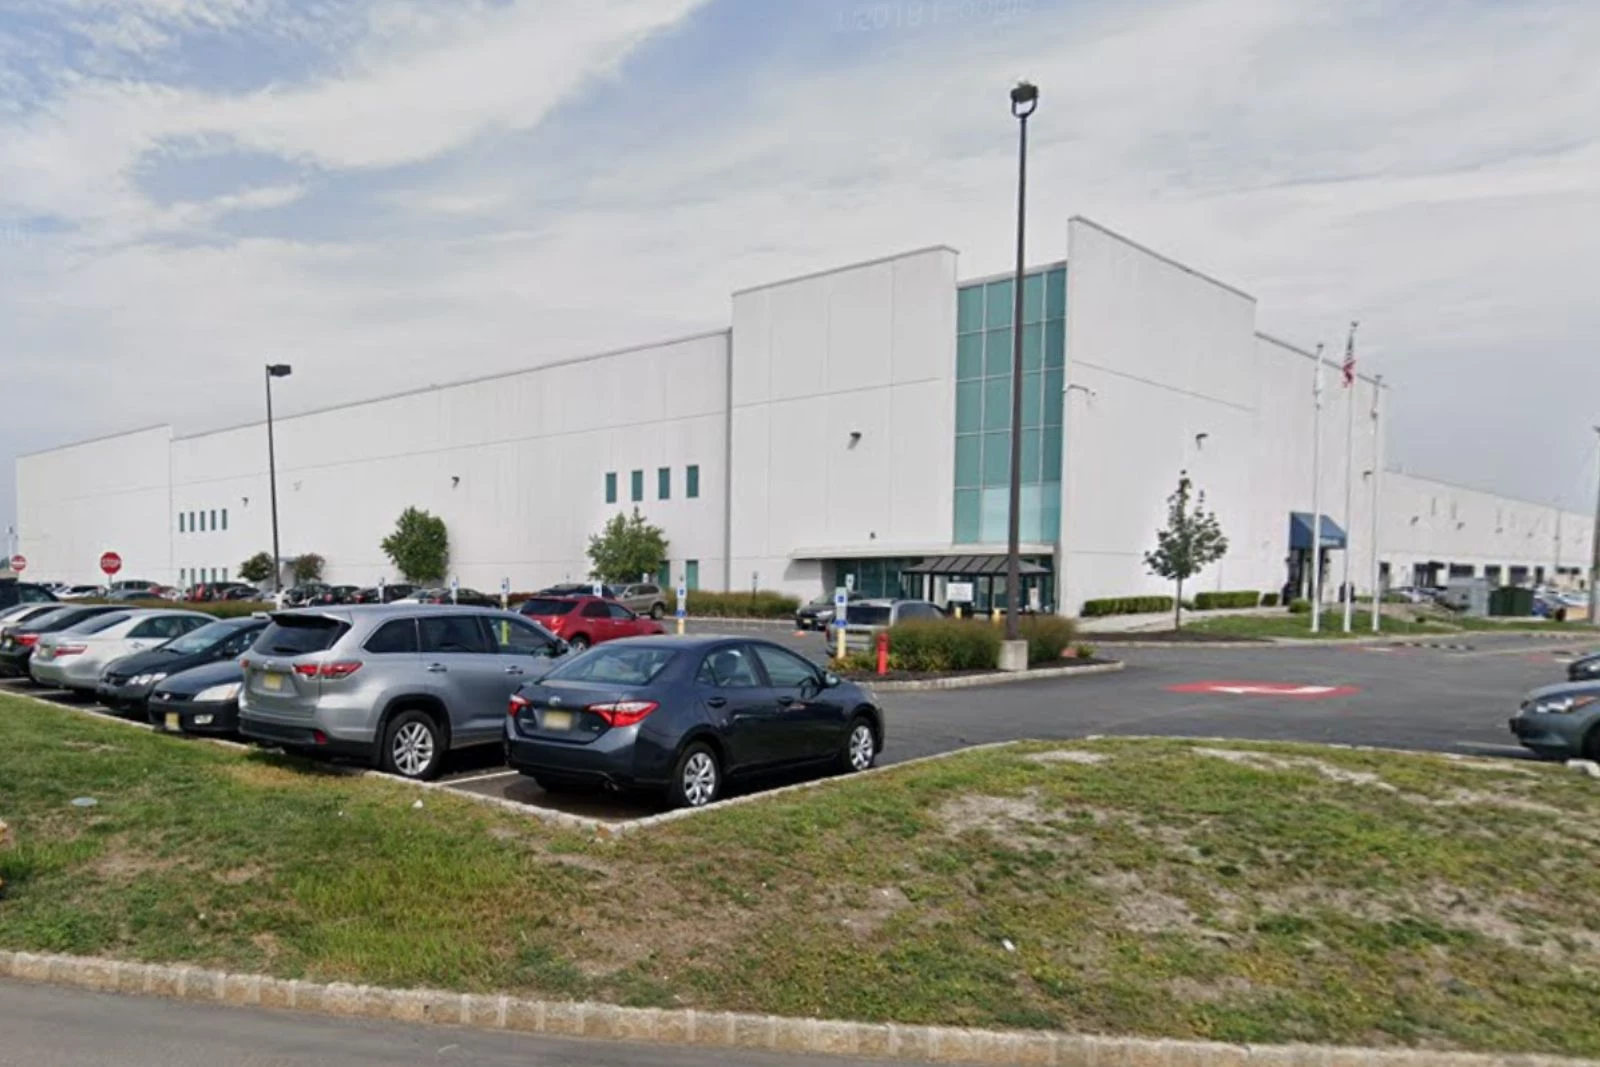 Amazon worker in Carteret, NJ dies during busy Prime Day